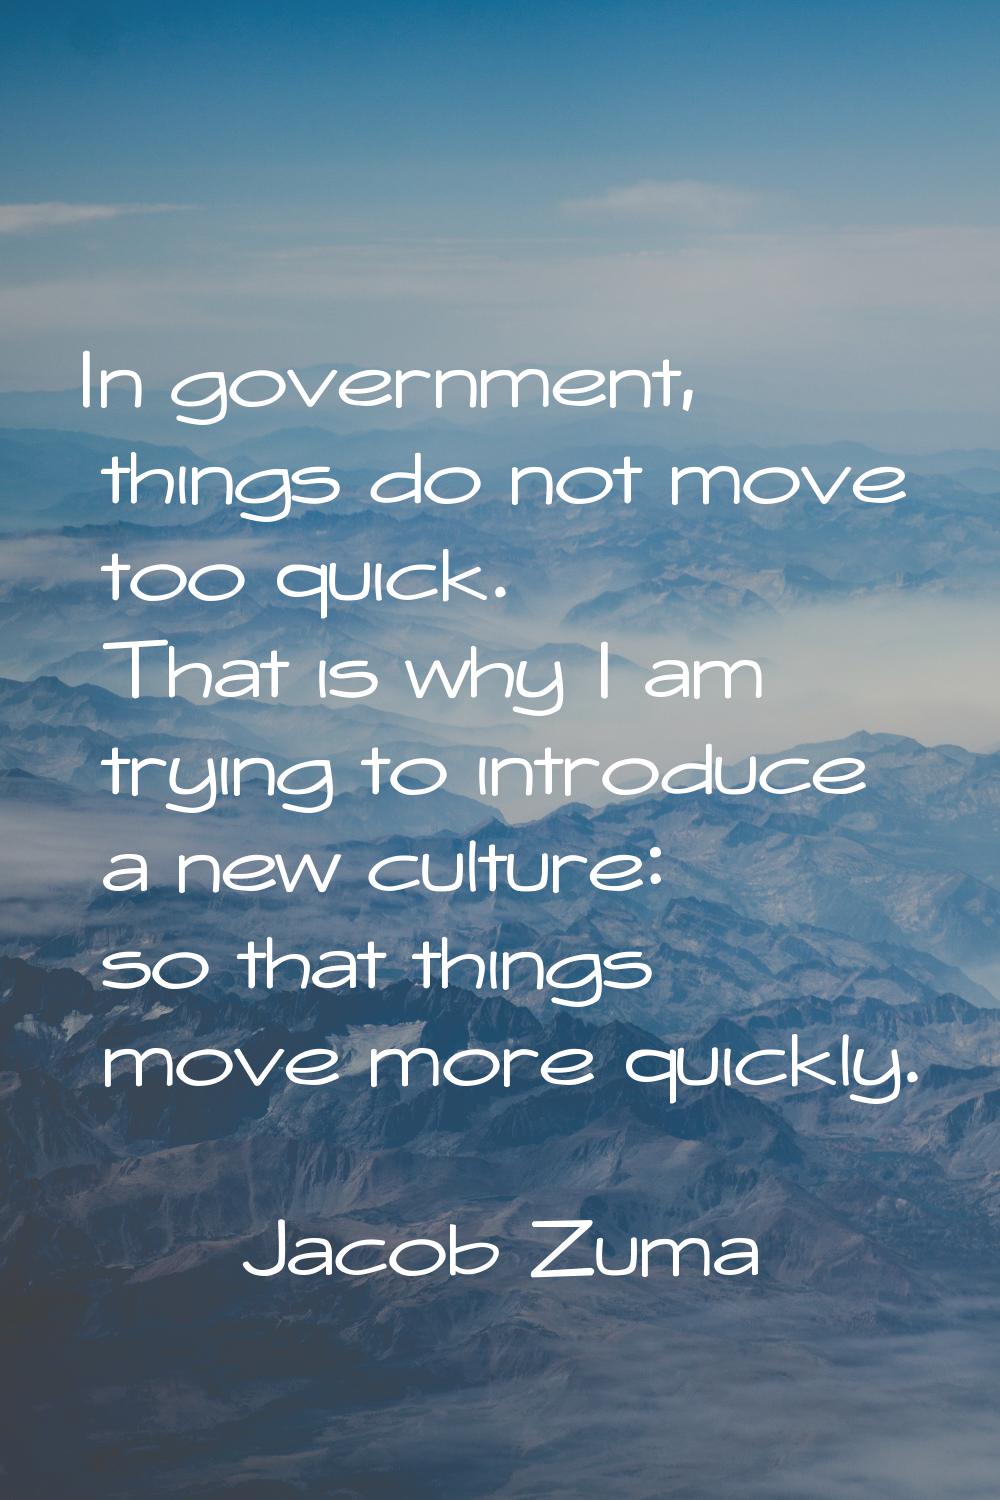 In government, things do not move too quick. That is why I am trying to introduce a new culture: so